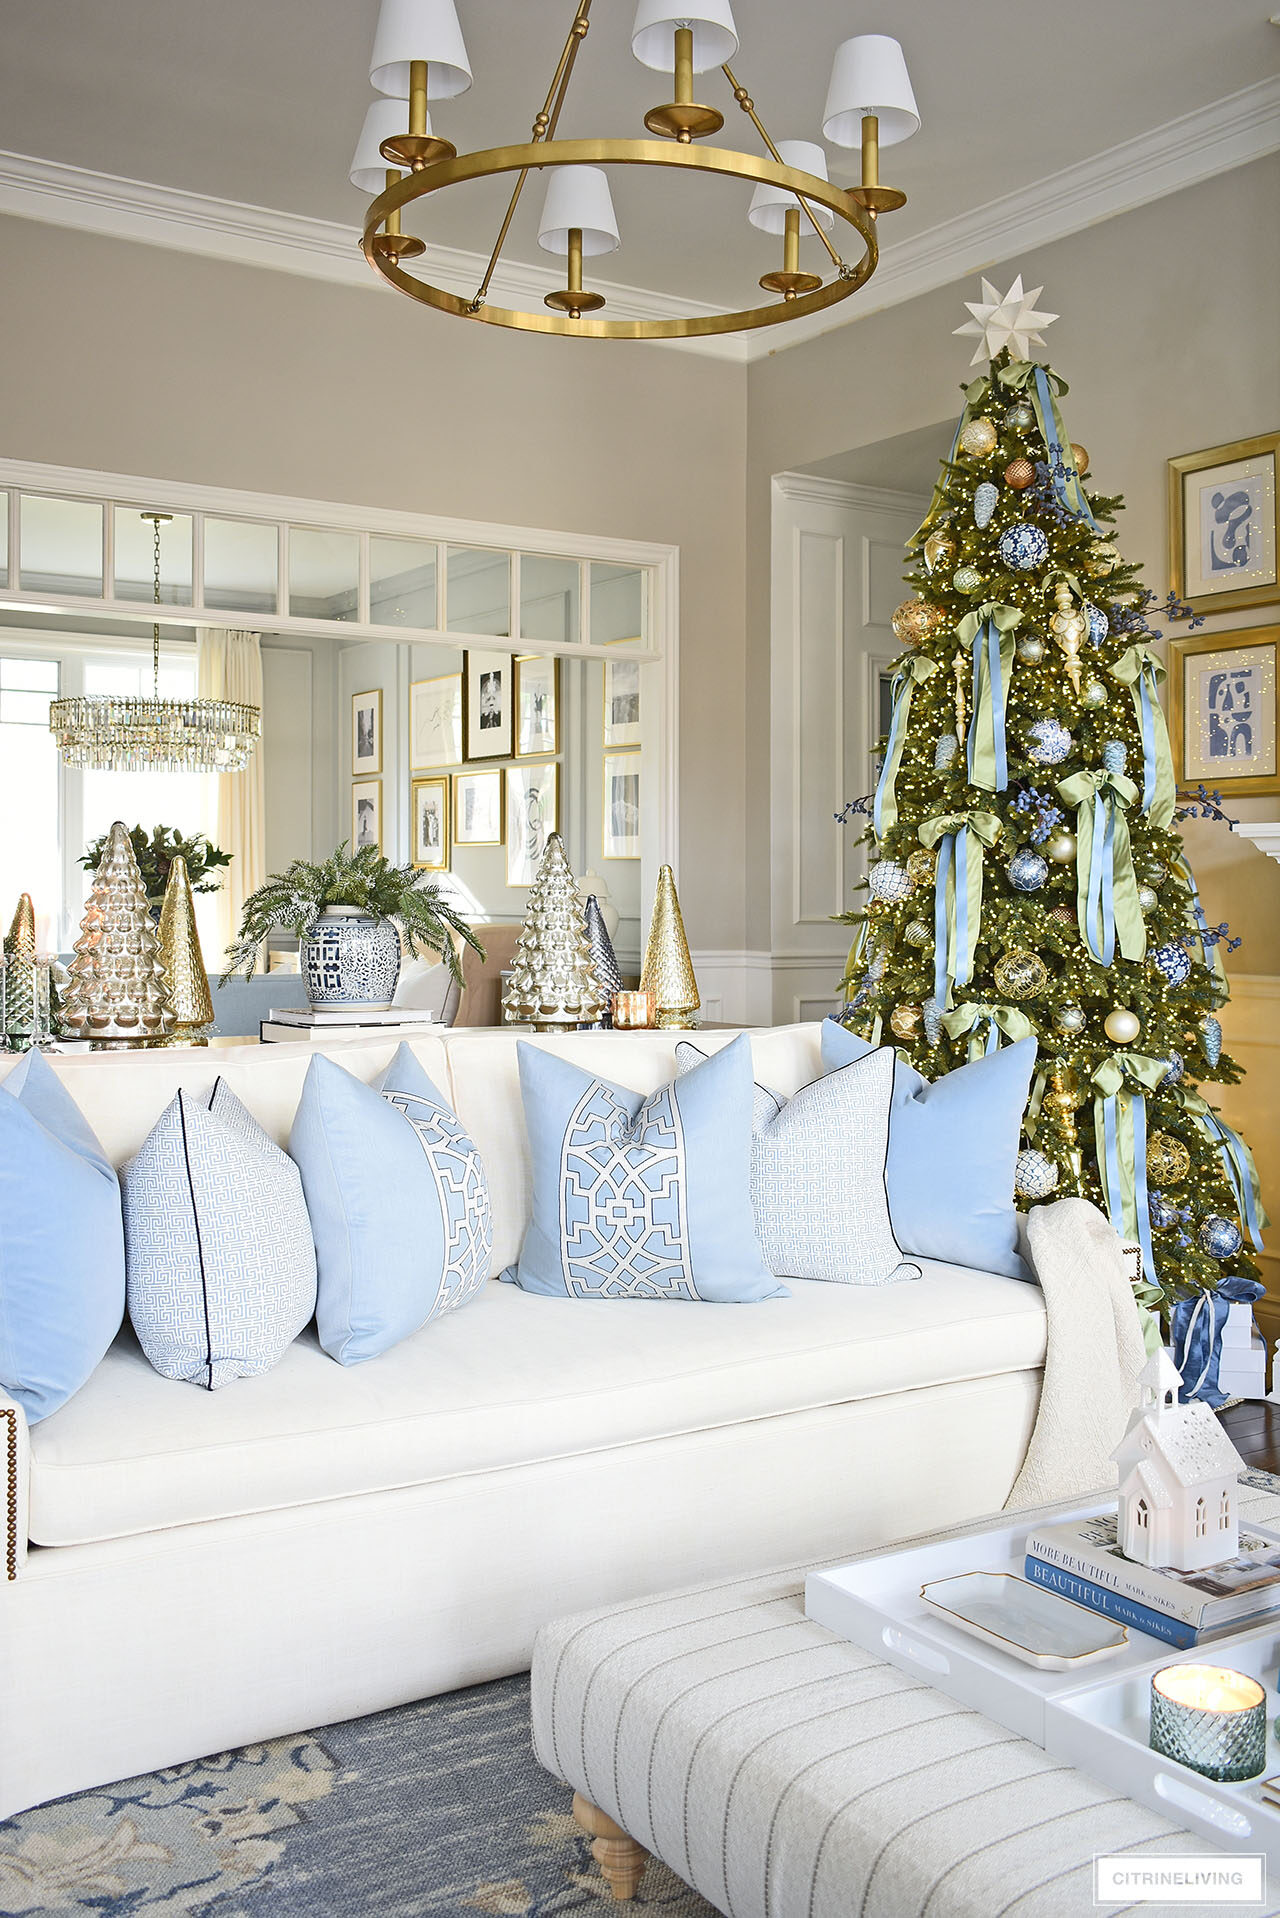 White sofa styled with blue pillows, a Christmas tree decorated with light green and light blue bows.